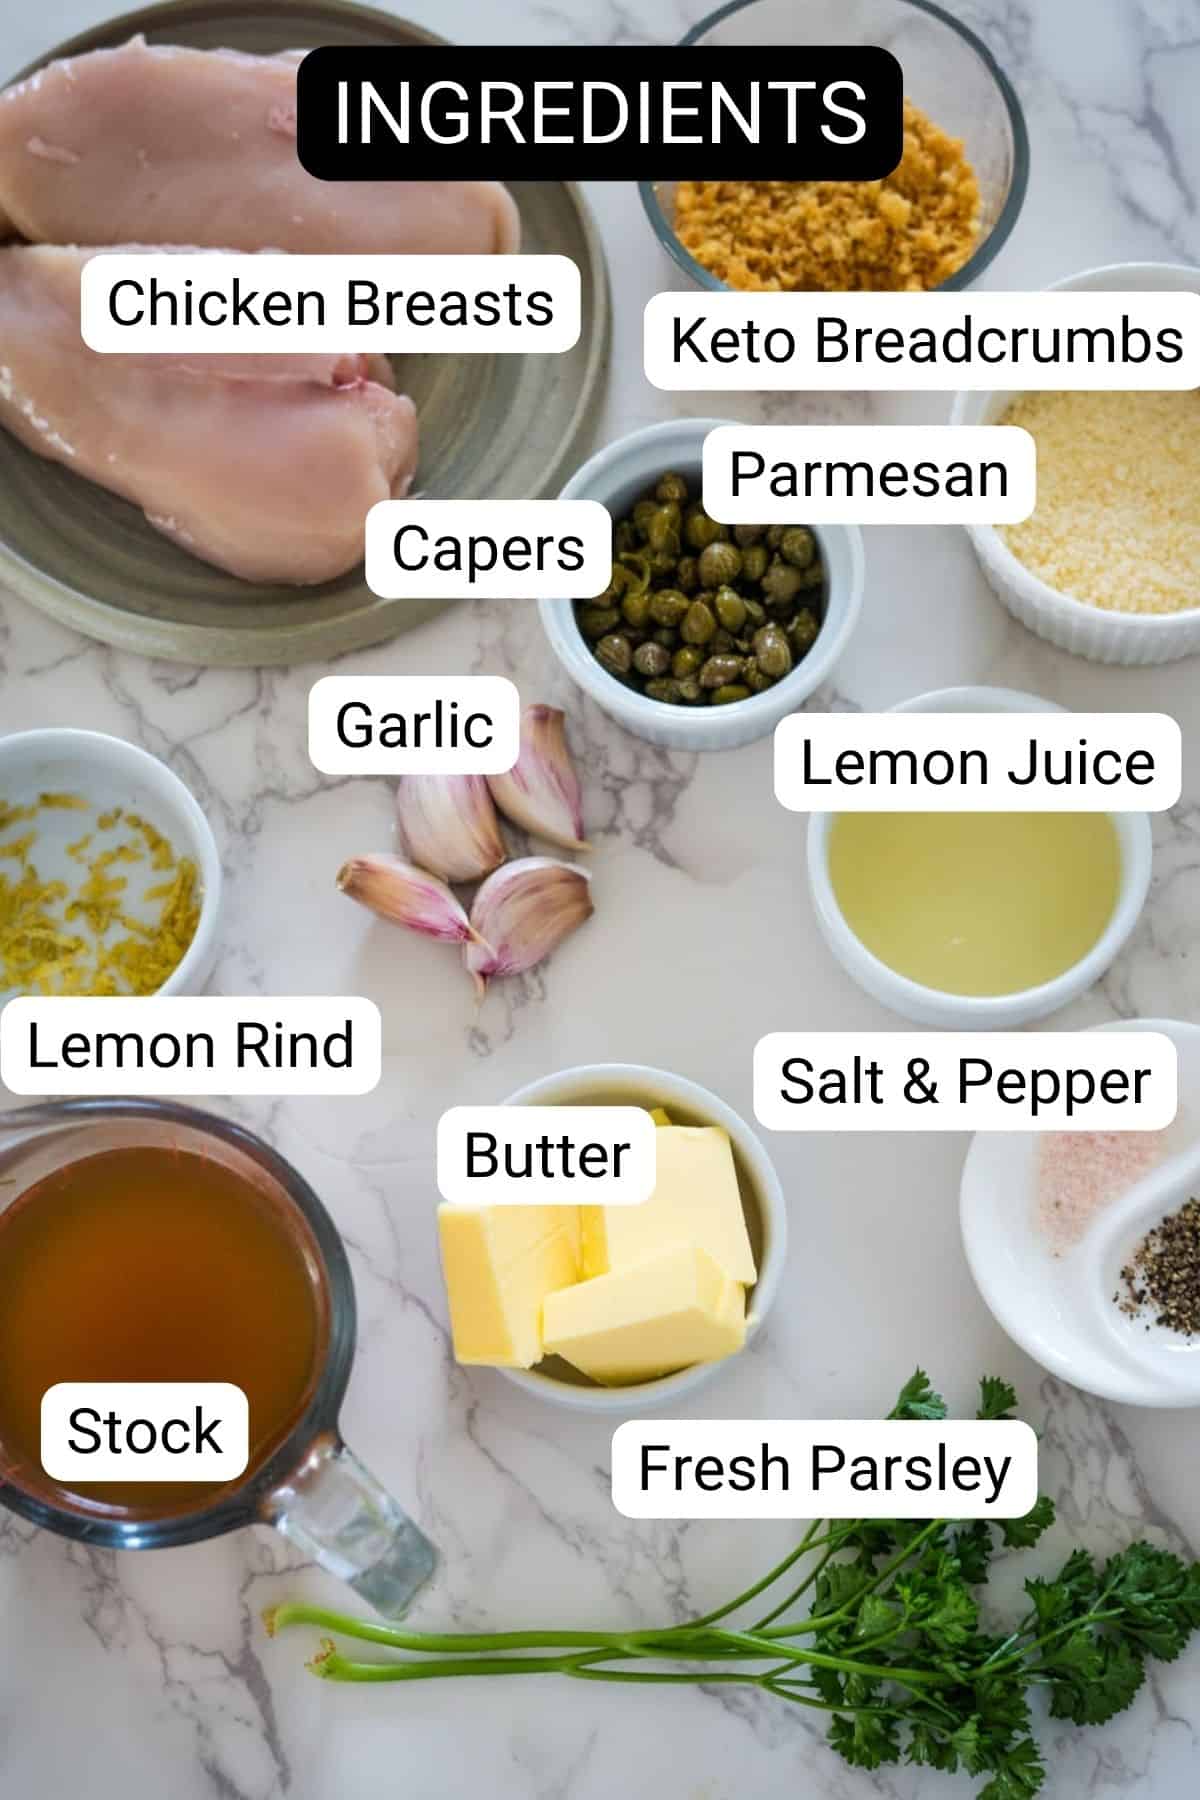 Various ingredients for a recipe laid out on a countertop, including chicken, breadcrumbs, capers, garlic, lemon juice, butter, and fresh parsley, labeled for clarity.